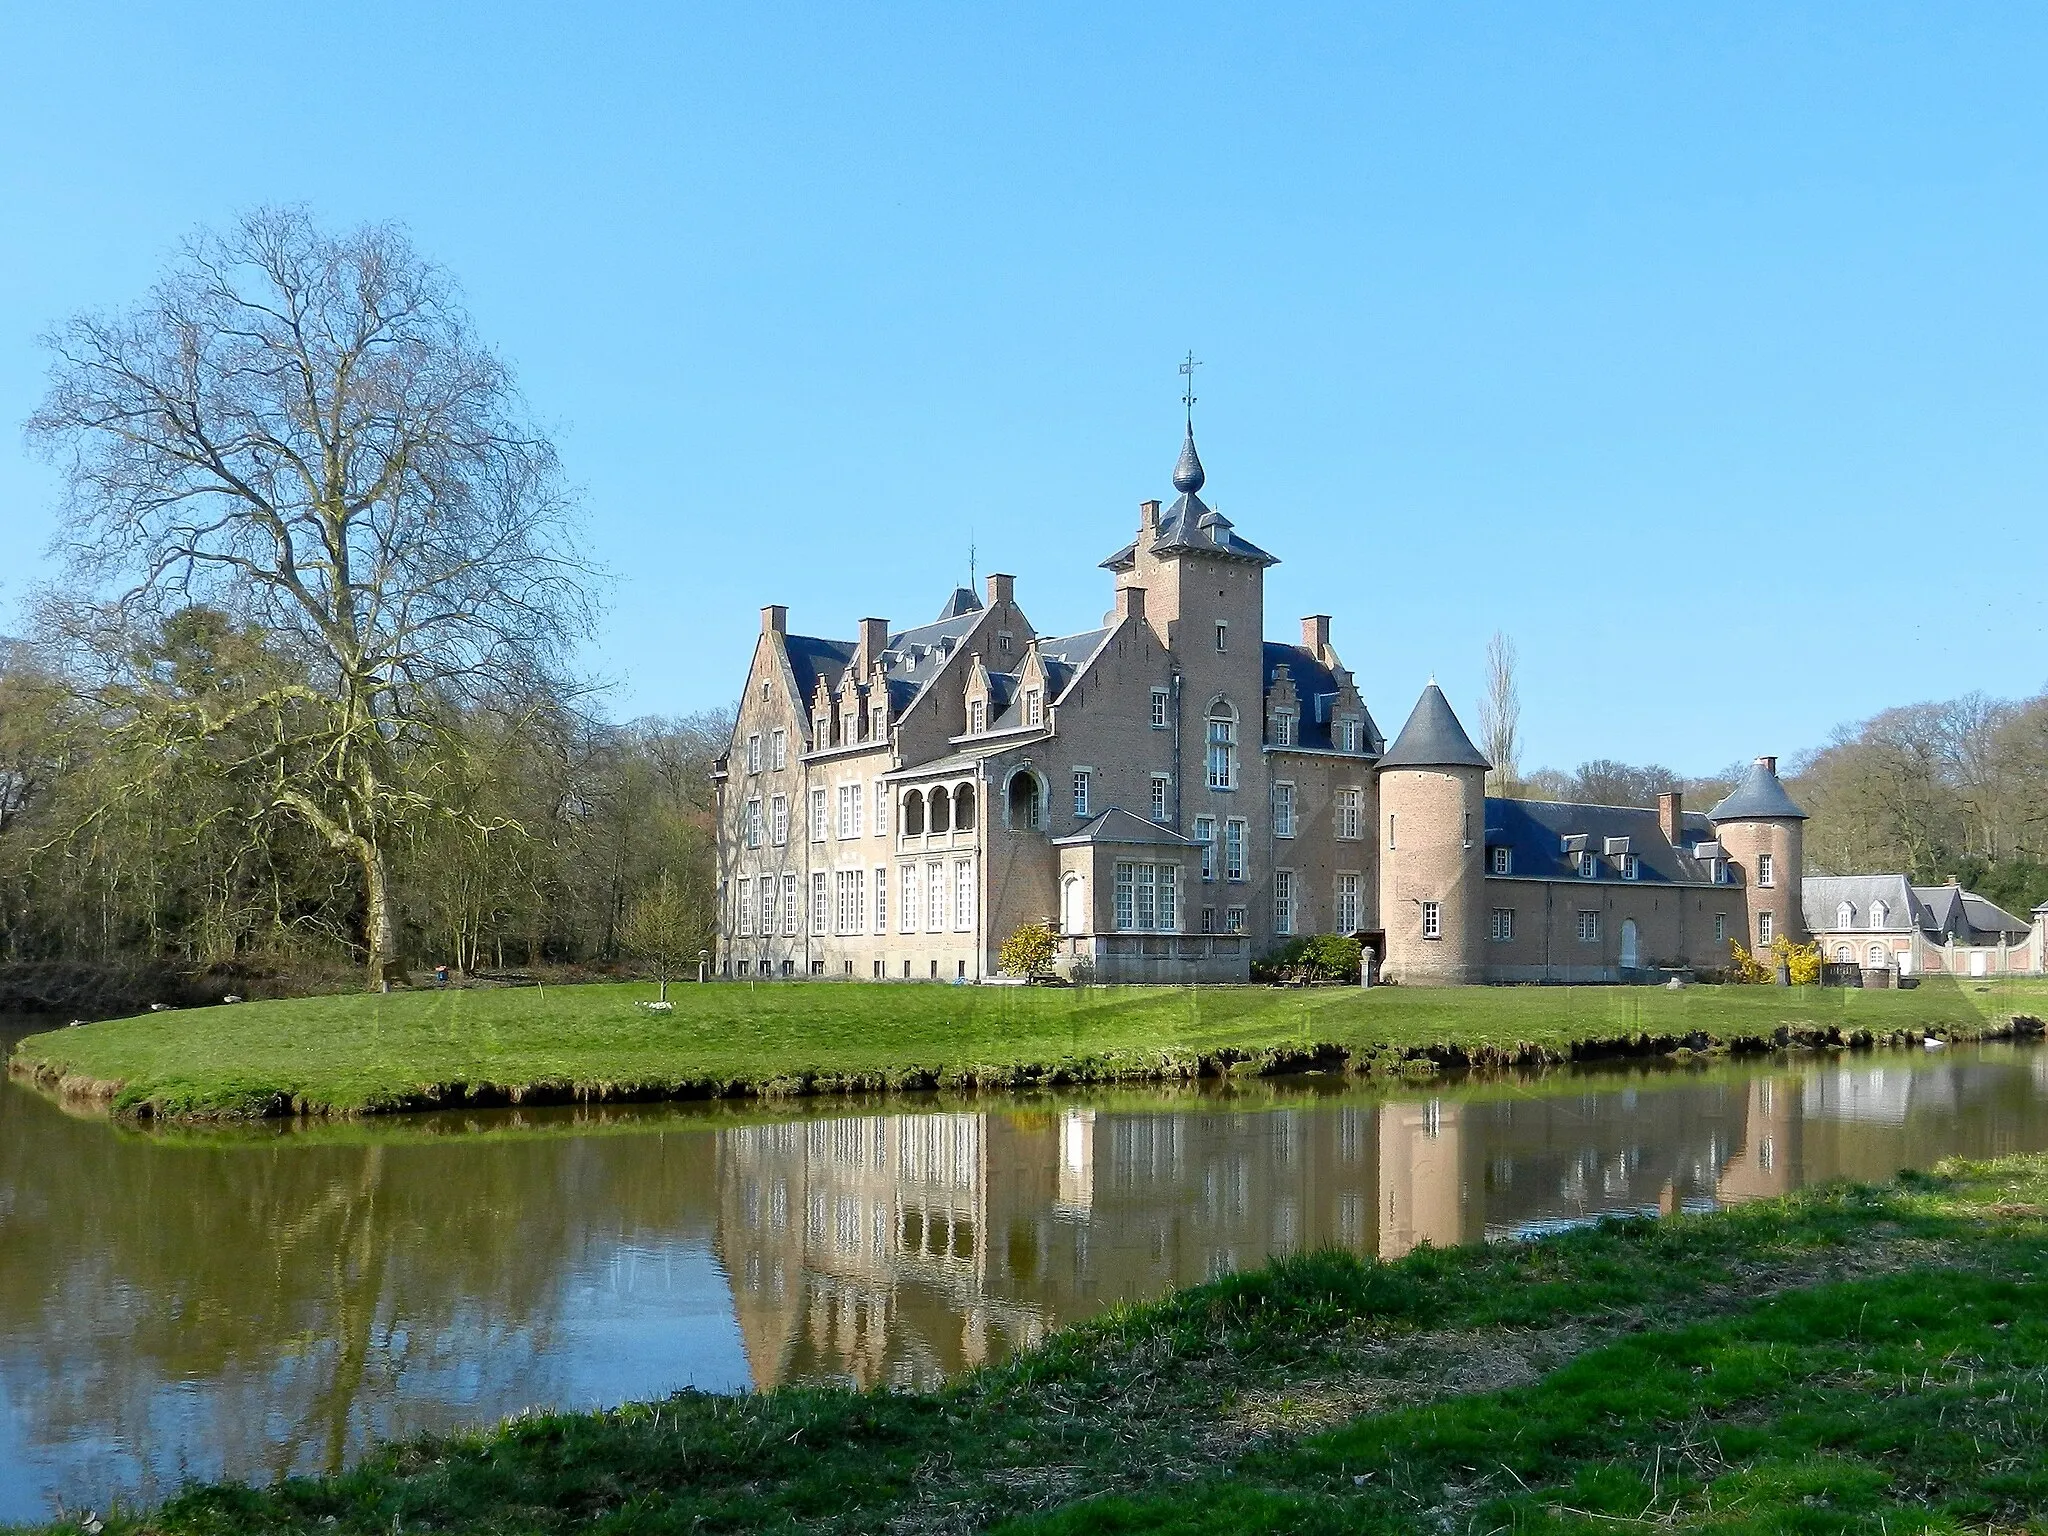 Photo showing: Court Melis in Lippelo Forest.  Allready mentioned In 1448 as  castle farm. Throughout the centuries it often changed owners and was rebuilt to the castle as it is today. In the 18th century, with the passage of the troops of Louis XIV, the castle was a temporary military headquarters. In 1914 the castle was destroyed by the guns of Fort Bornem because Germans were staying in it. It was rebuilt in 1920 in Flemish Renaissance style. Belgian king Leopold III also did stay at the castle during the 18-day war in 1940.
The castle is privately owned by Count Geoffrey de Pierrefeu and is not accessible, but it is visible from the street. The forest around it is partially open for walkers. This photo was taken on a day the estate was exceptionally accessible for walkers.